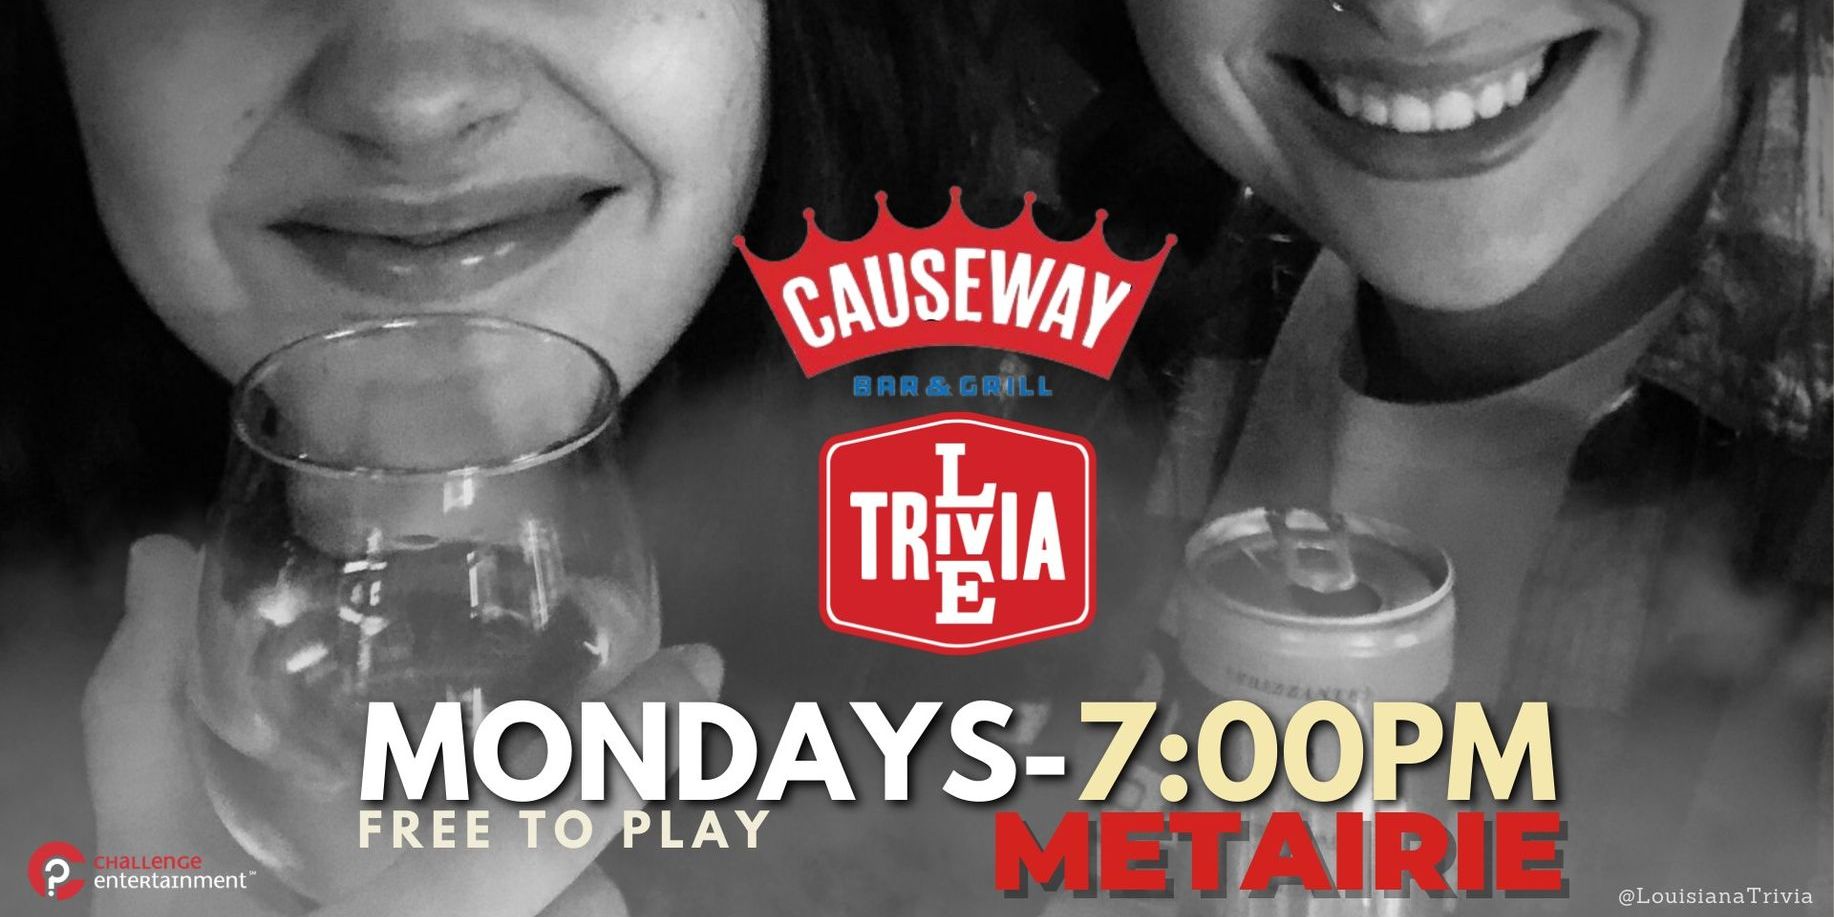 Live Trivia at Causeway Bar & Grill promotional image